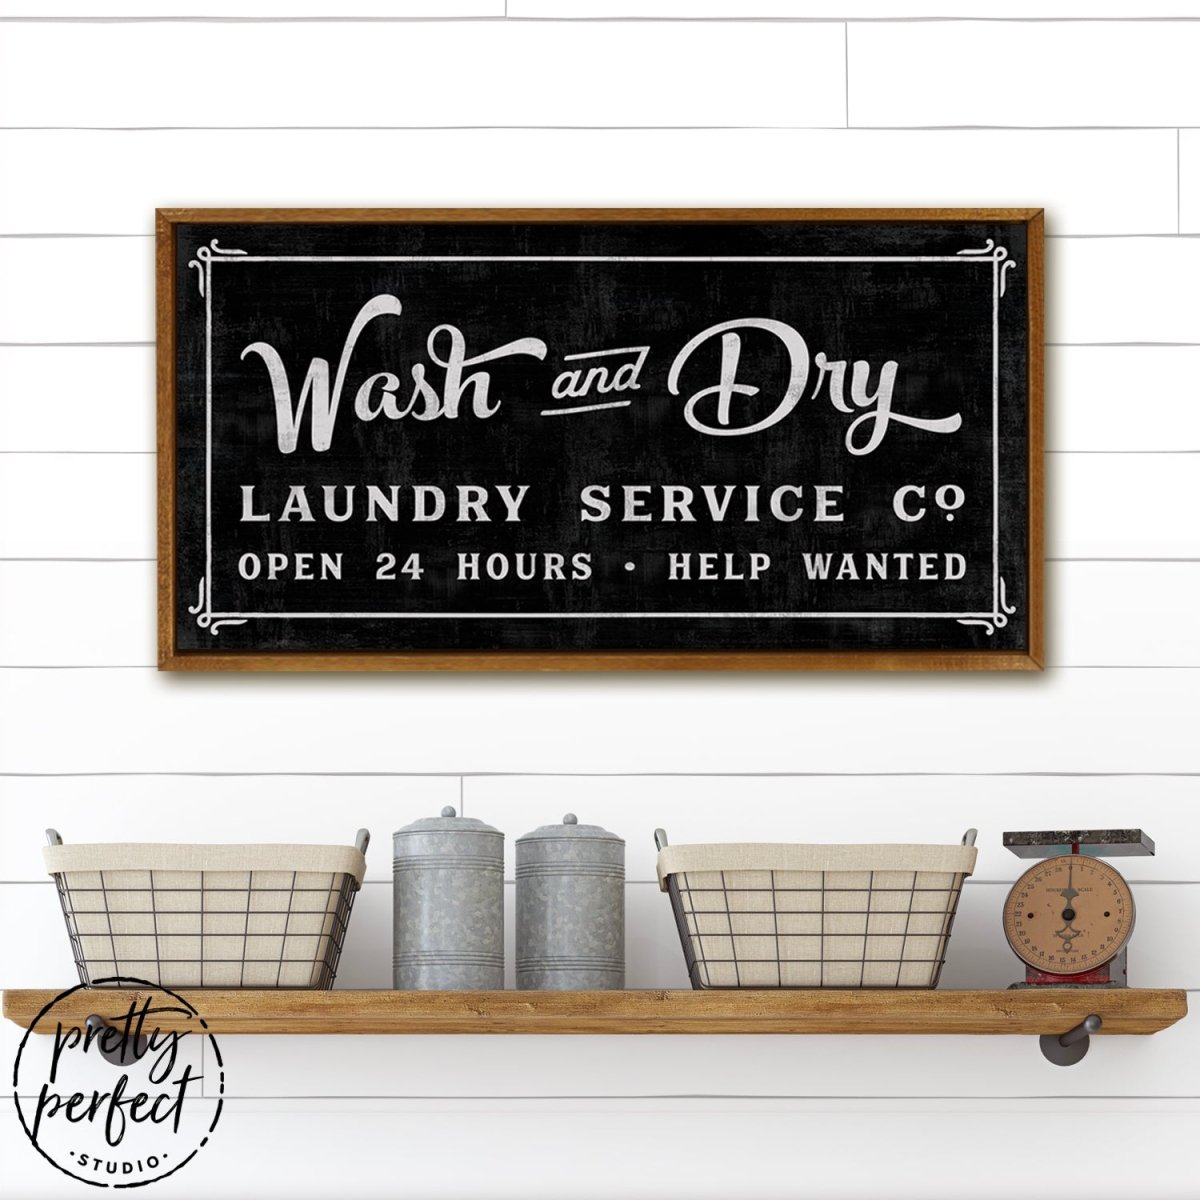 Wash and Dry Laundry Room Canvas Sign Hanging Above Shelf - Pretty Perfect Studio